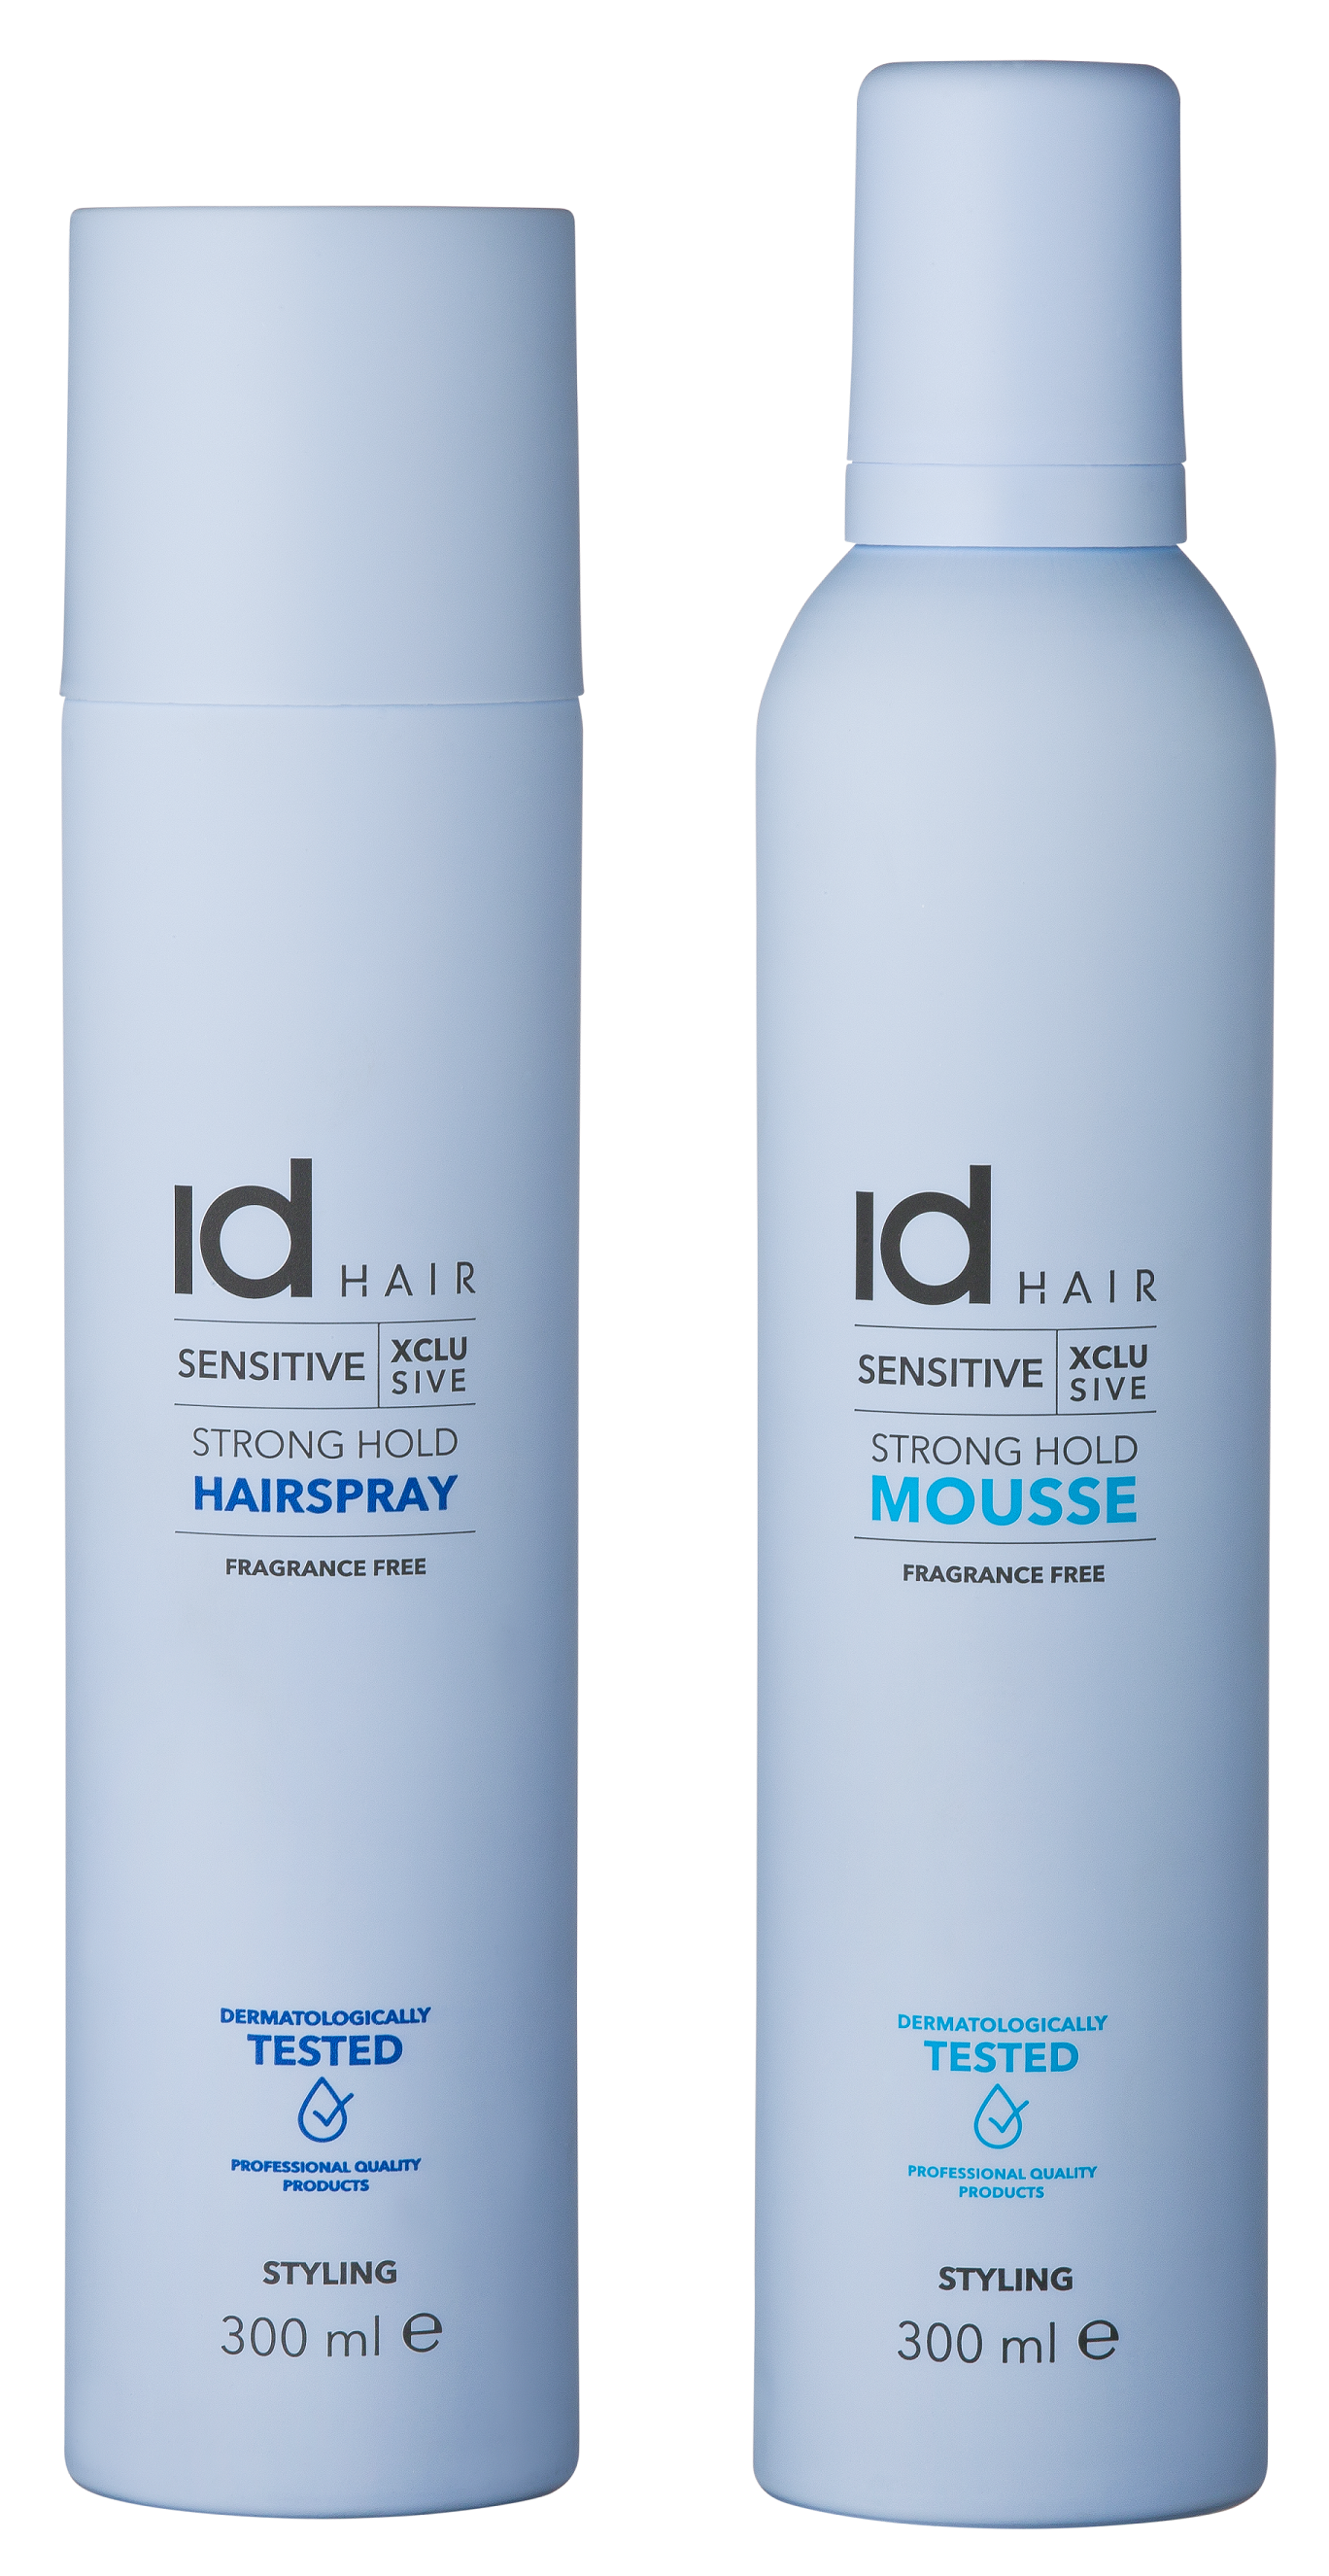 IdHAIR - Sensitive Xclusive Strong Hold Hairspray 300 ml + Mousse 300 ml